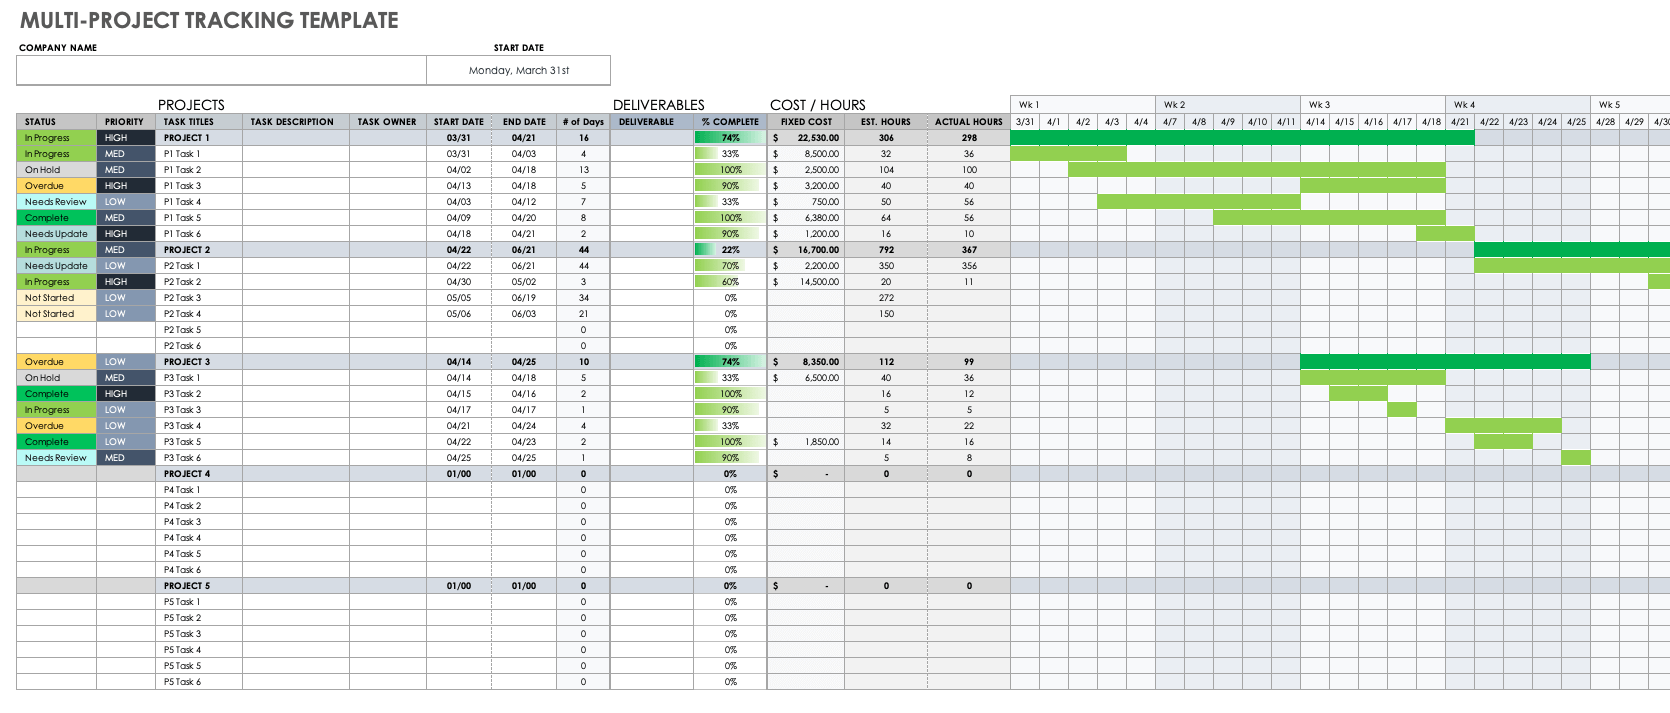 Multi Project Tracking Template